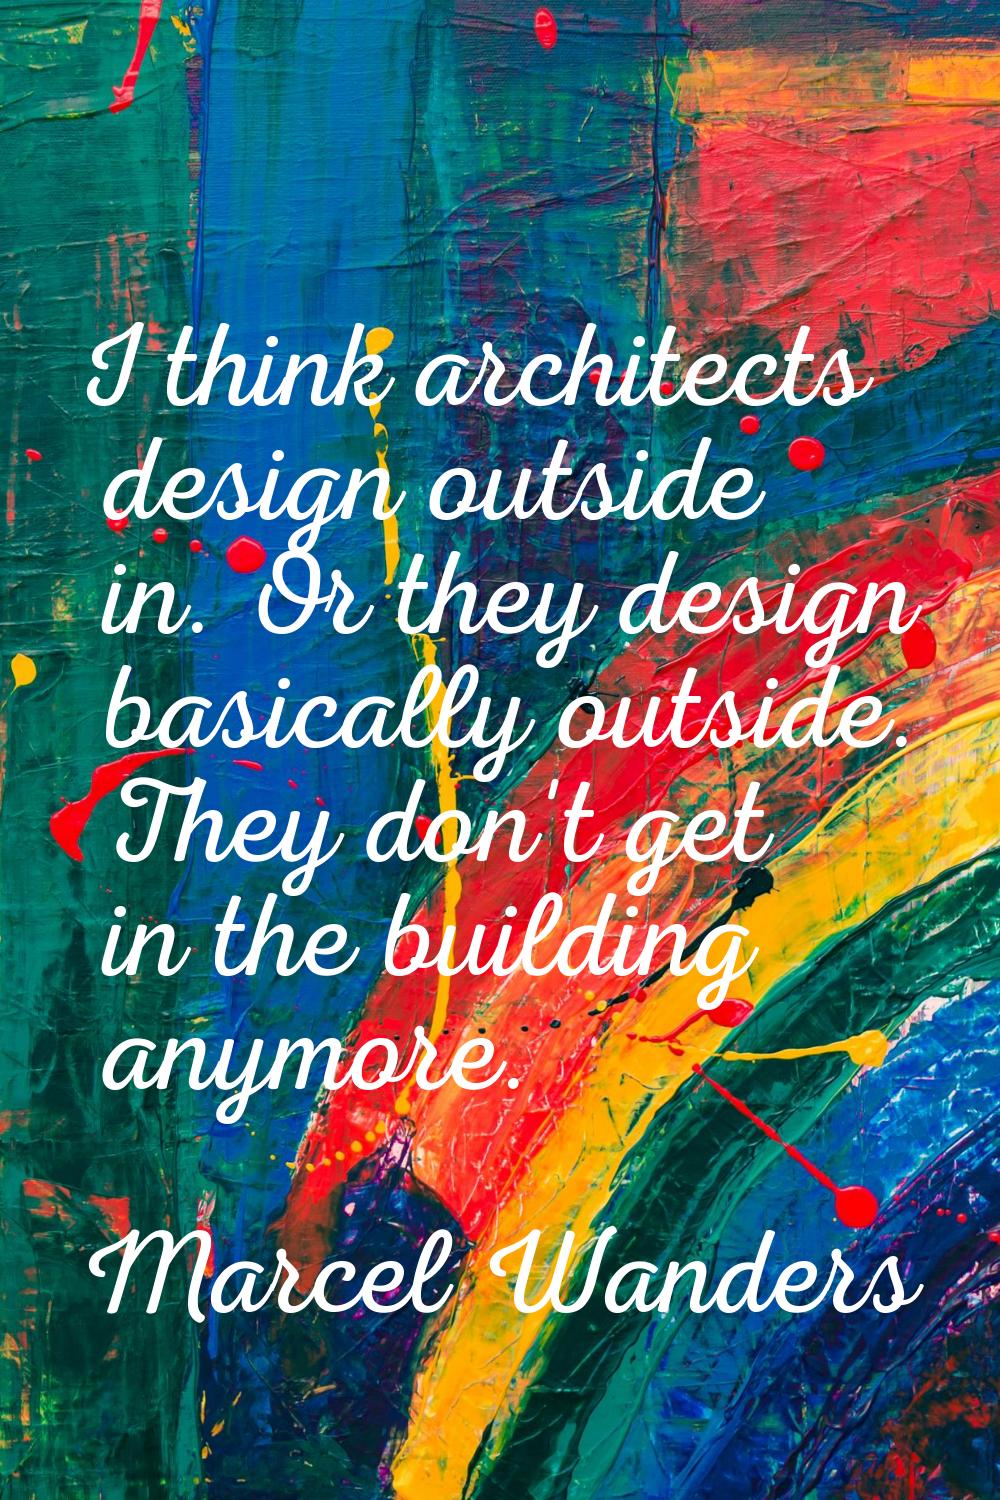 I think architects design outside in. Or they design basically outside. They don't get in the build